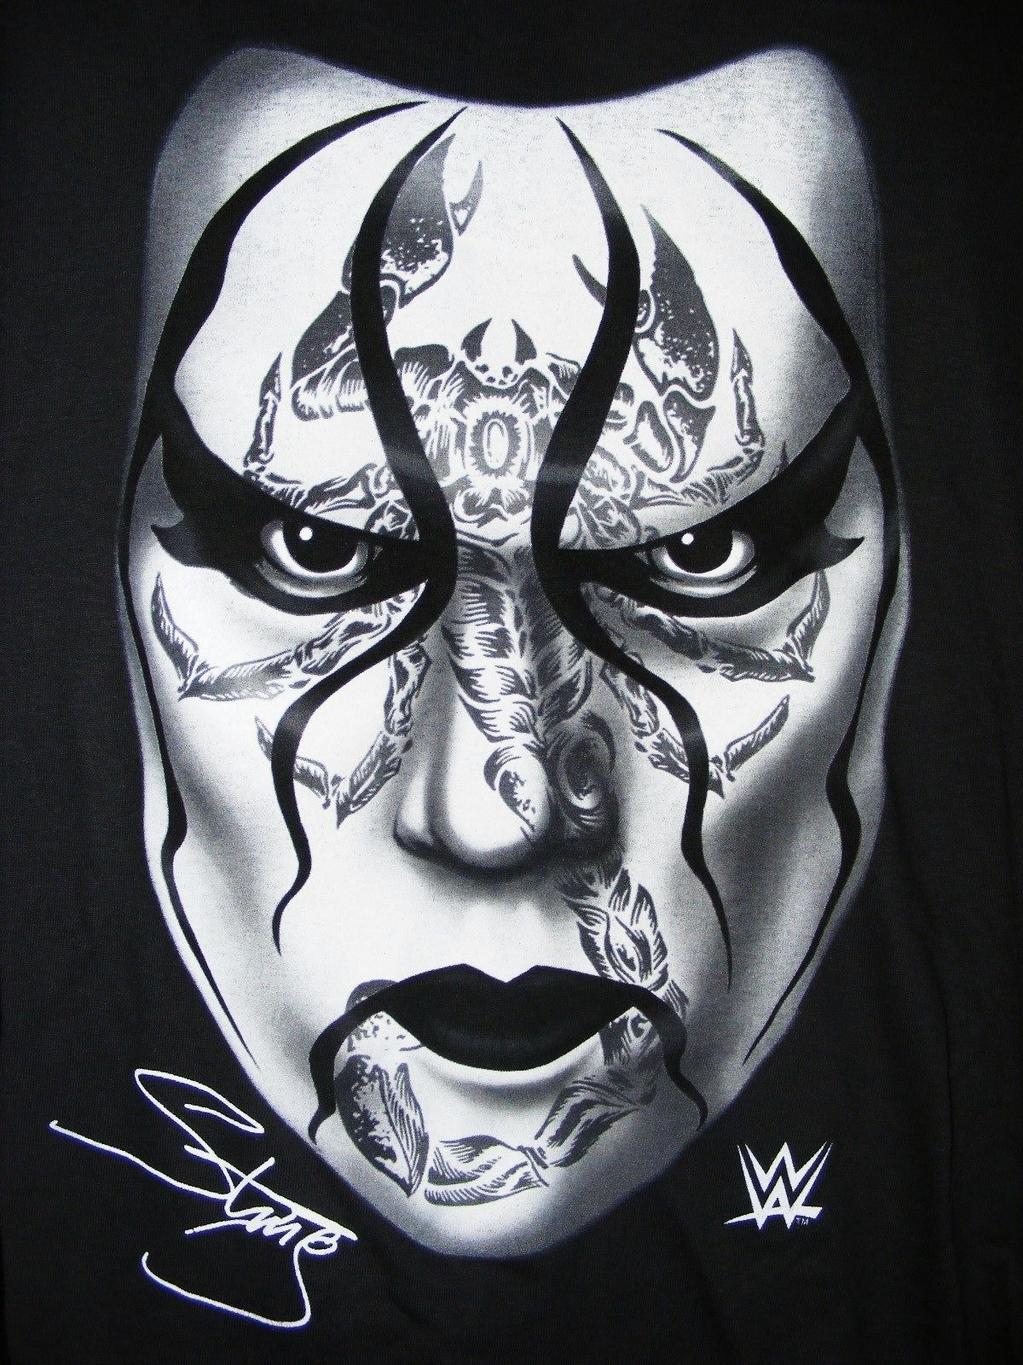 image about sting. Sting wcw, Icon and Wwe